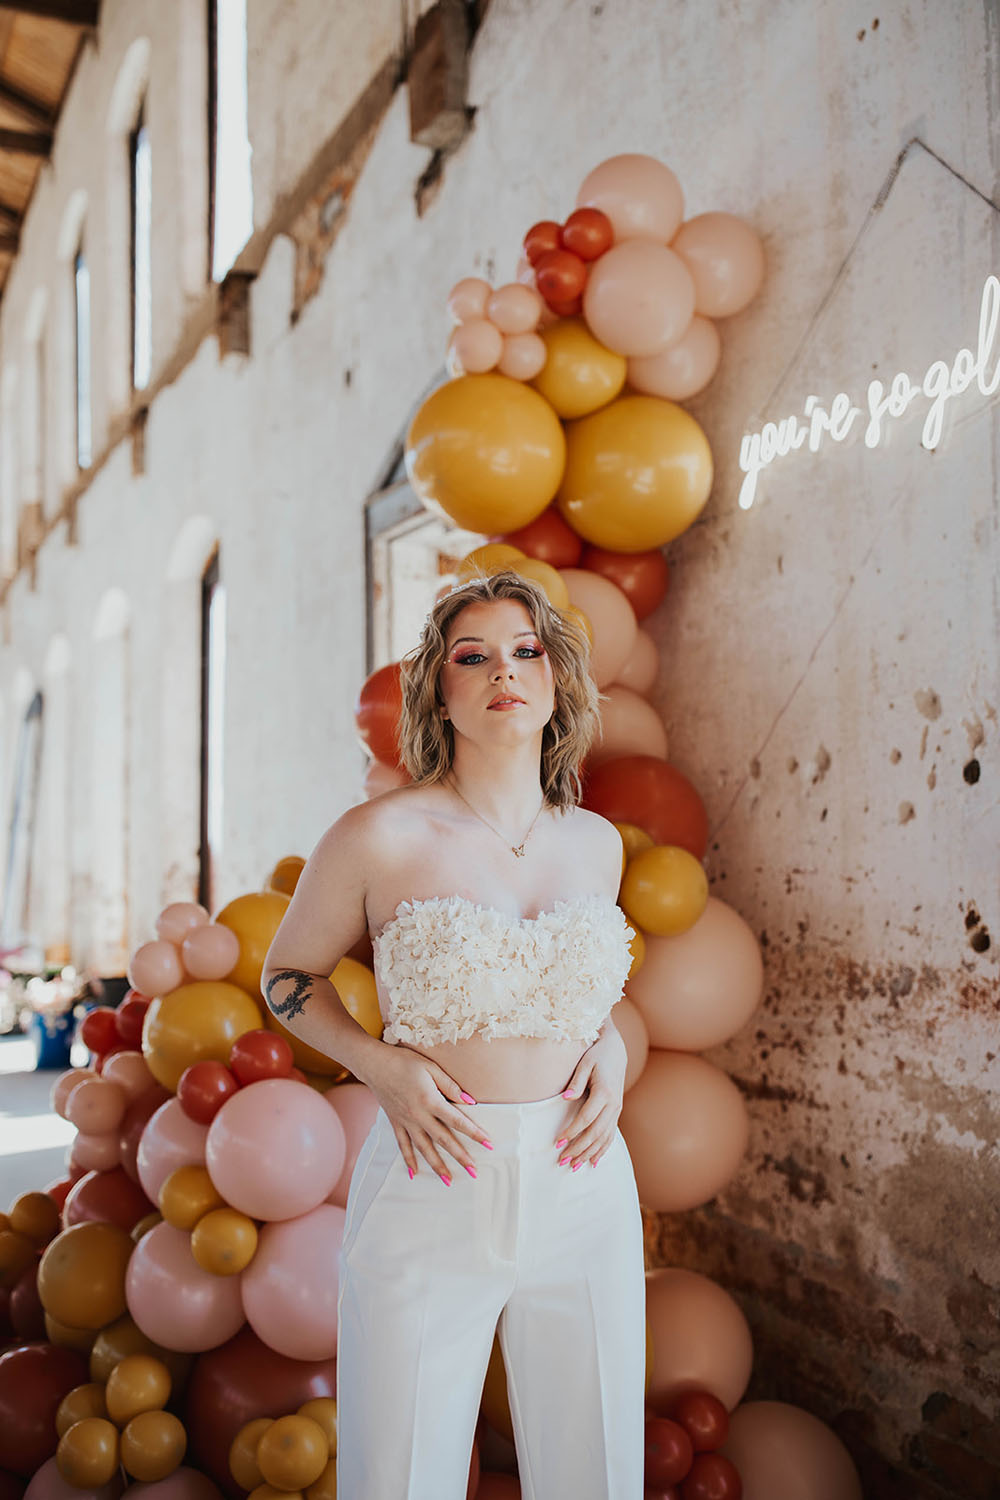 Groovy mod disco-themed wedding overflowing with flowers